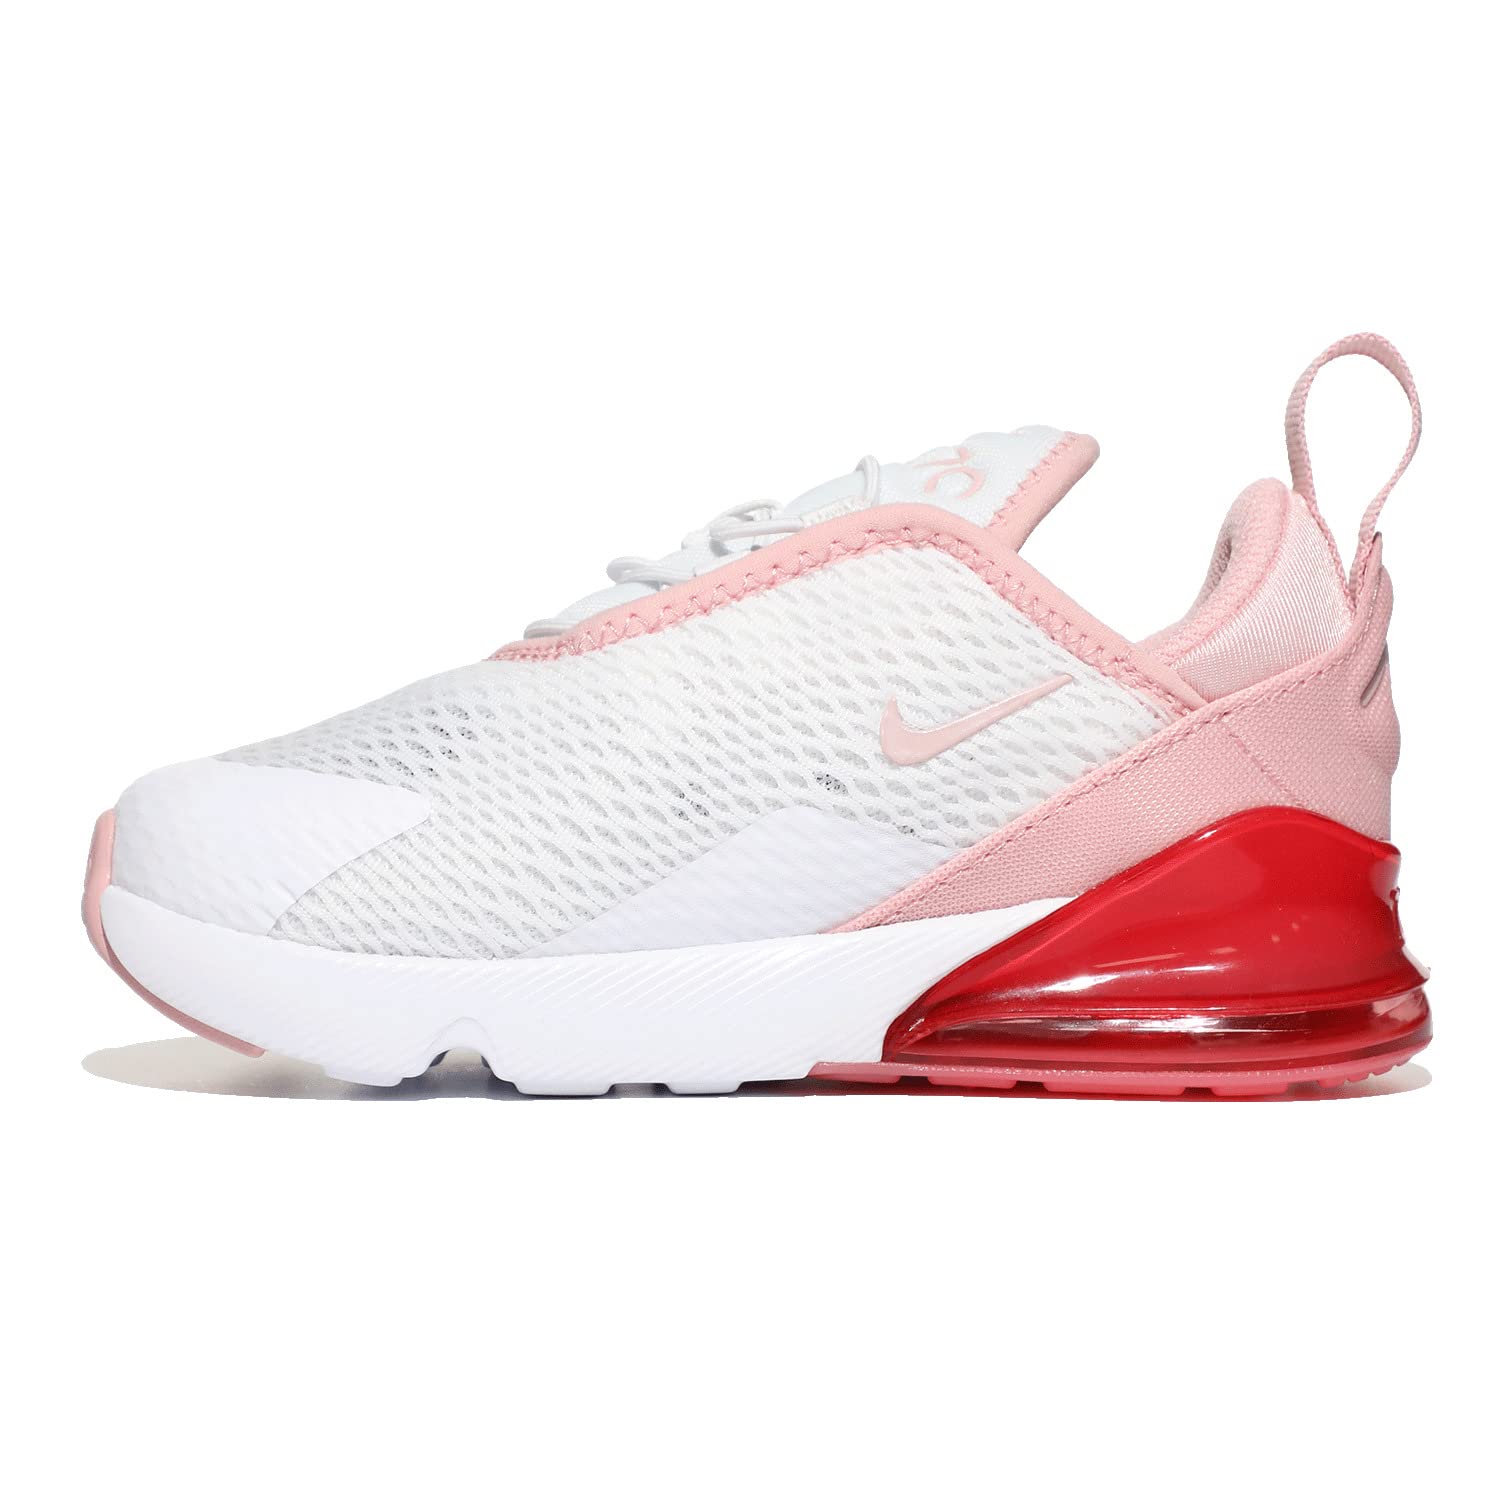 Image 3 of Air Max 270 (Infant/Toddler)